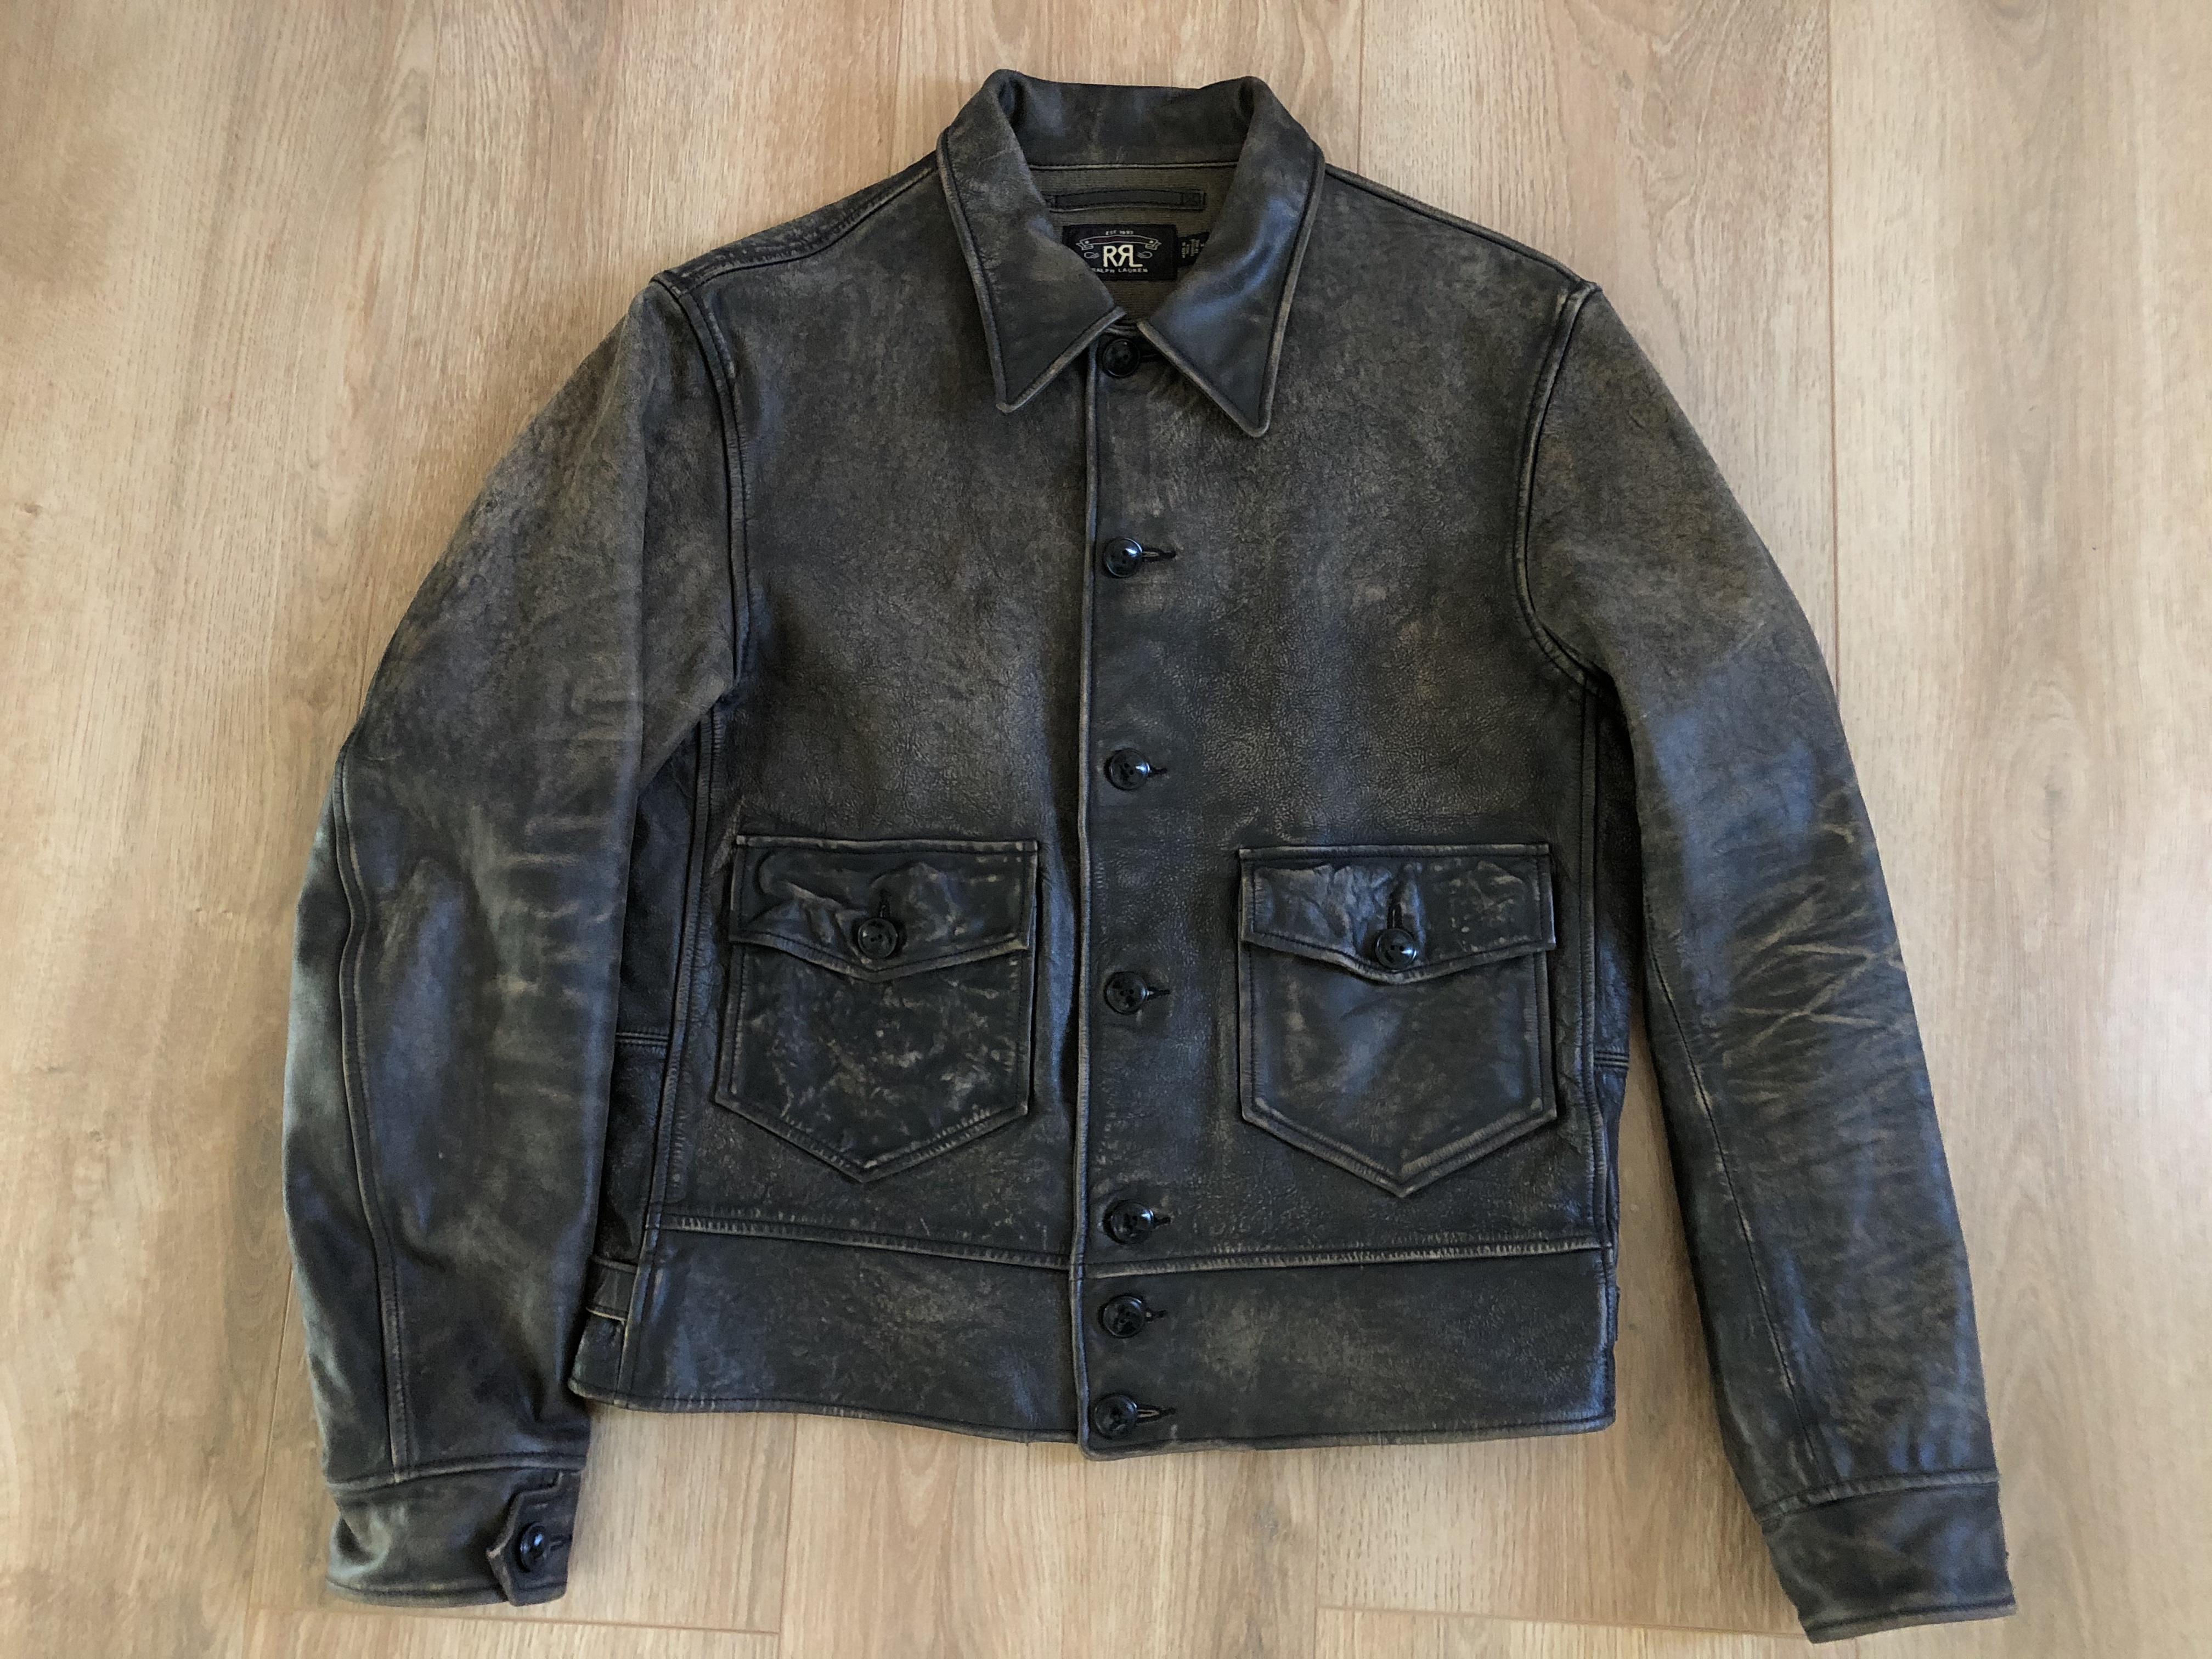 Finds and Deals - Leather Jacket Edition | Page 117 | The Fedora Lounge